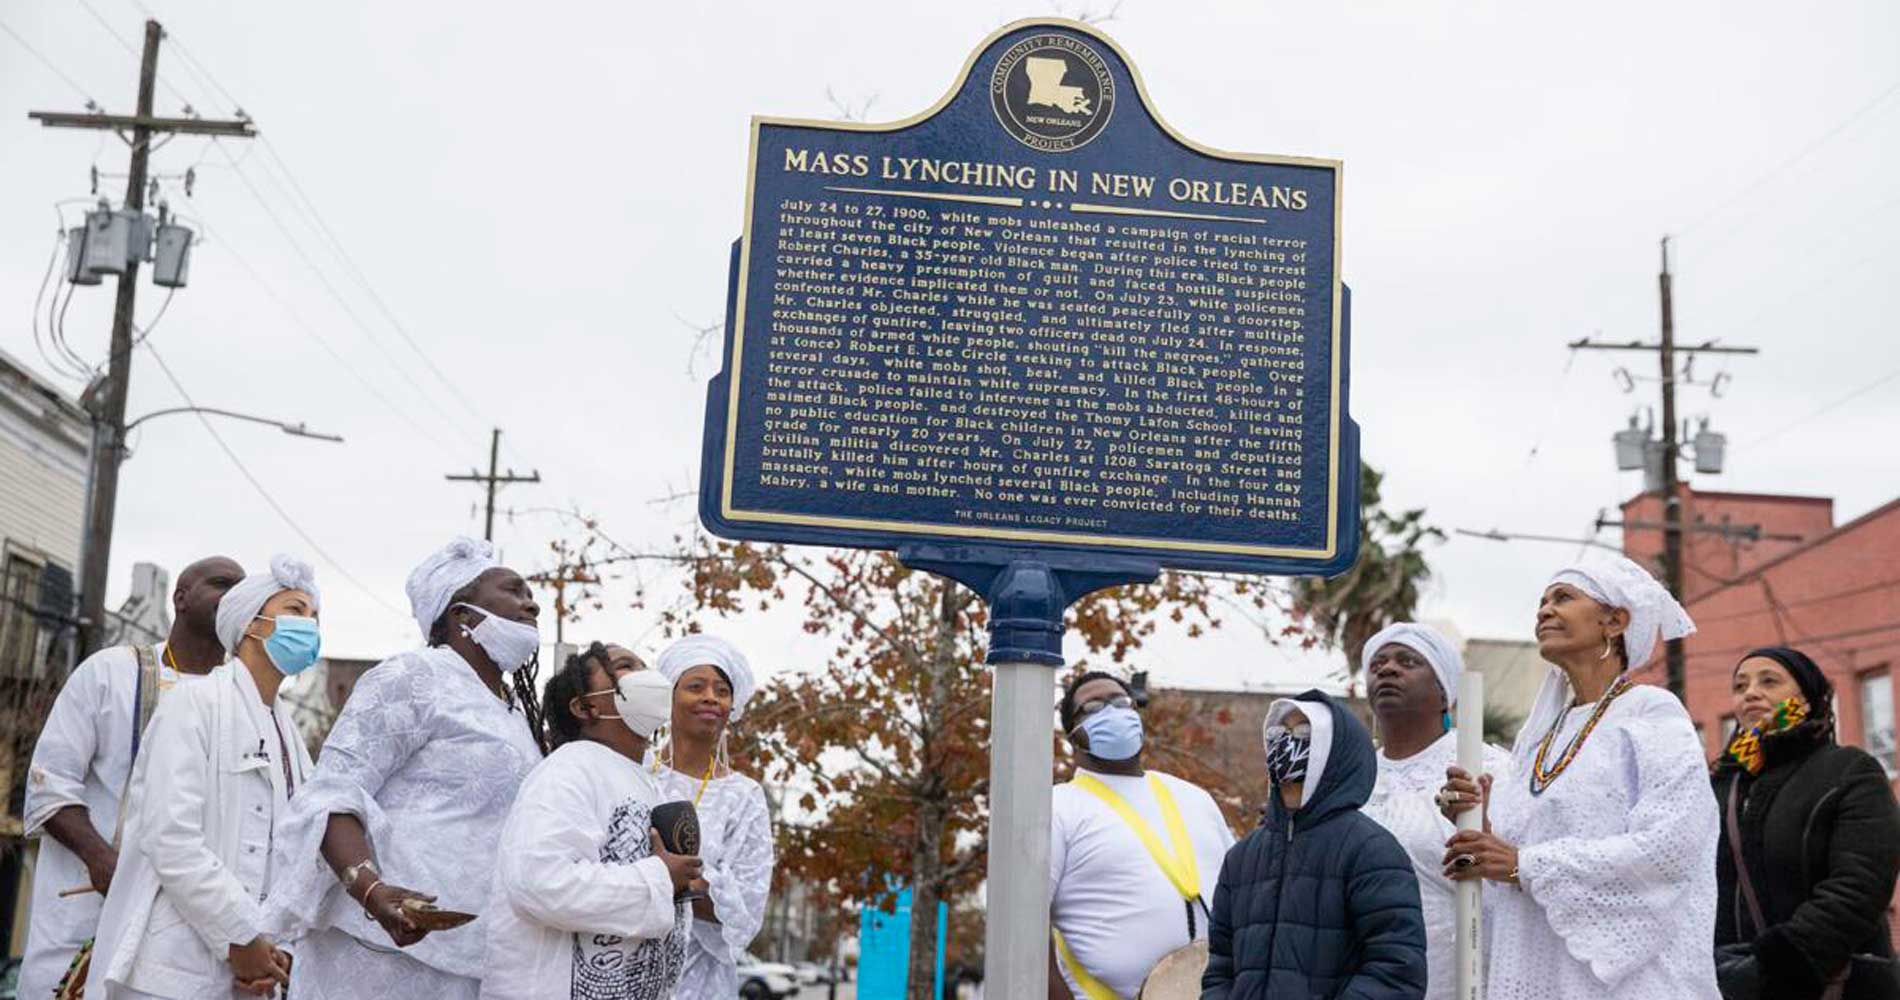 Eji Partners With Community To Memorialize Lynching Victims In New Orleans 9713